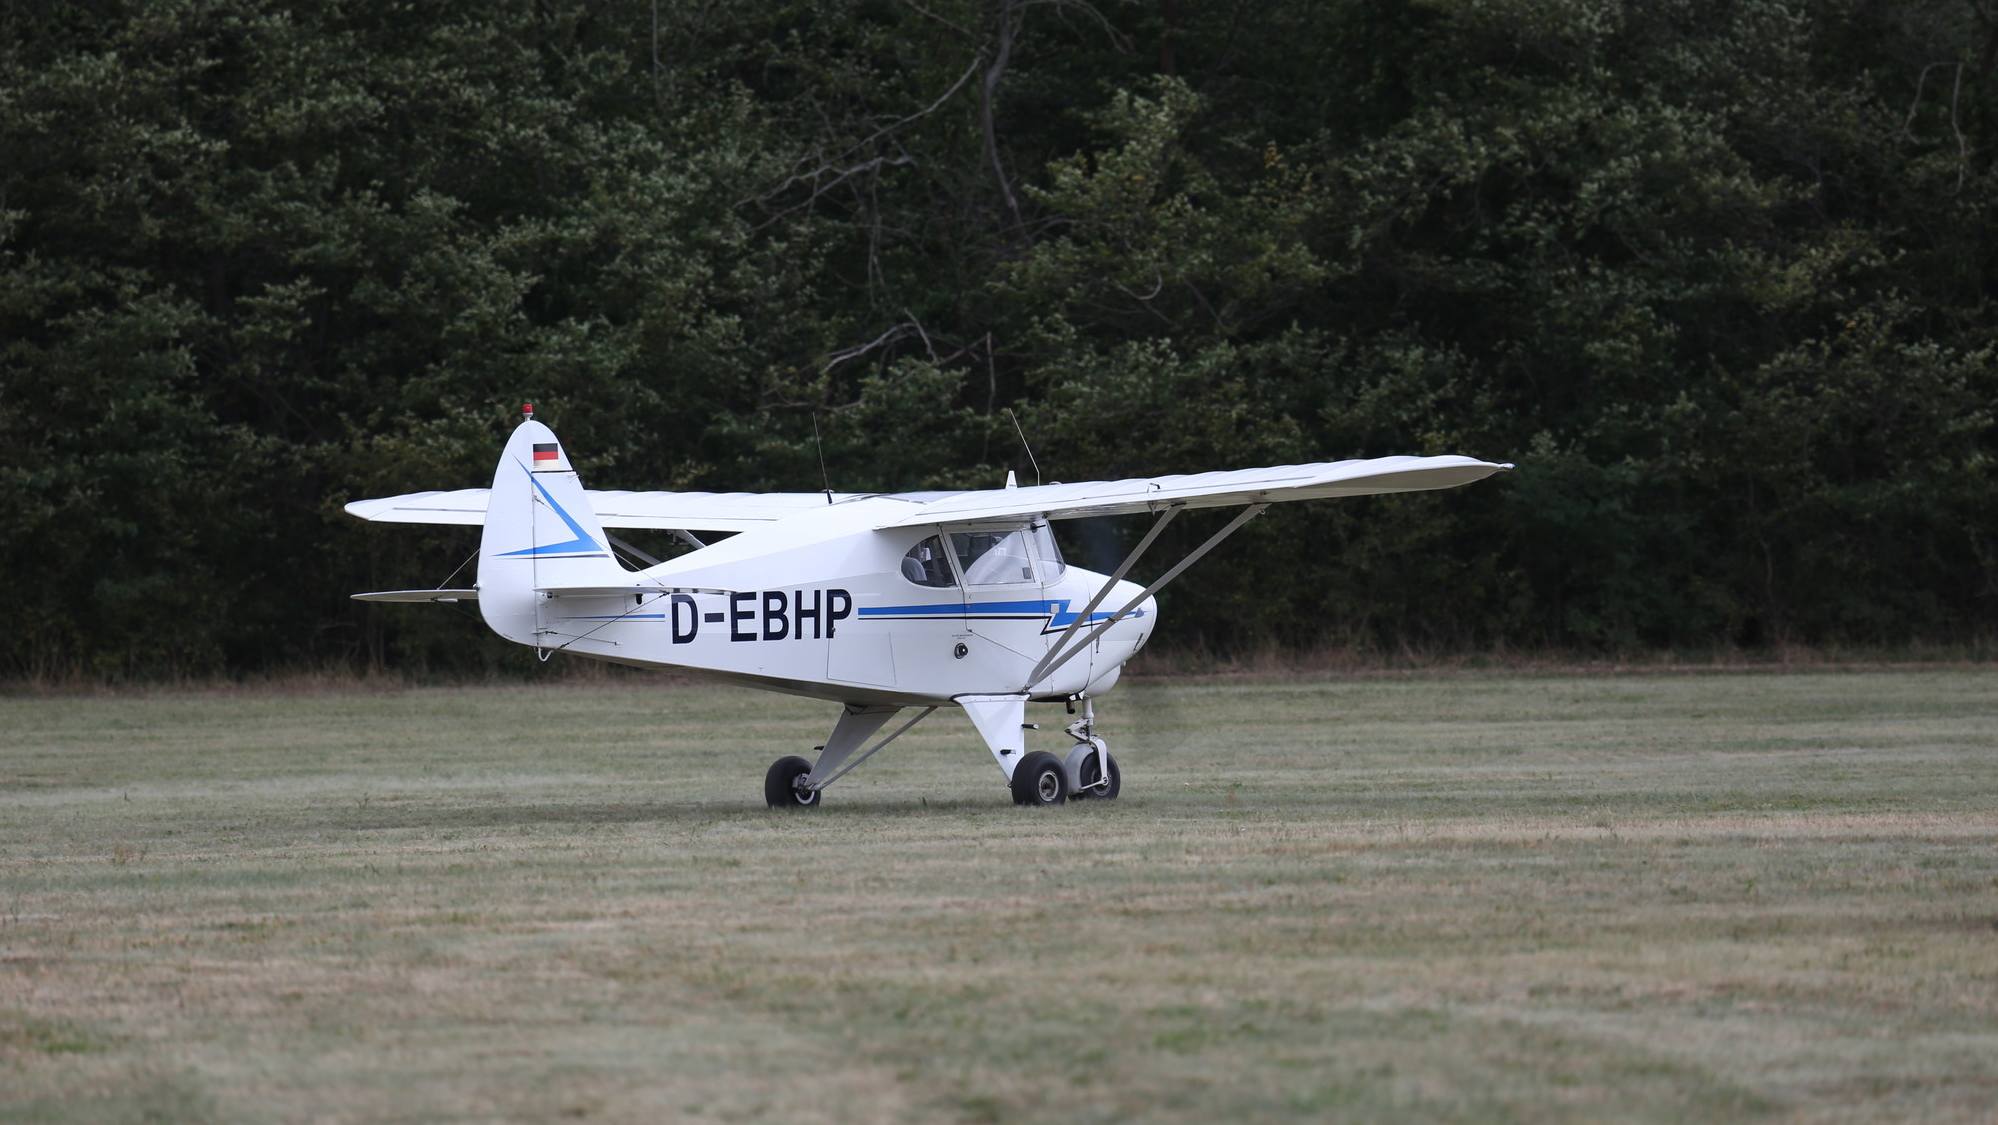 D- EBHP - PA-22 Tri-Pacer